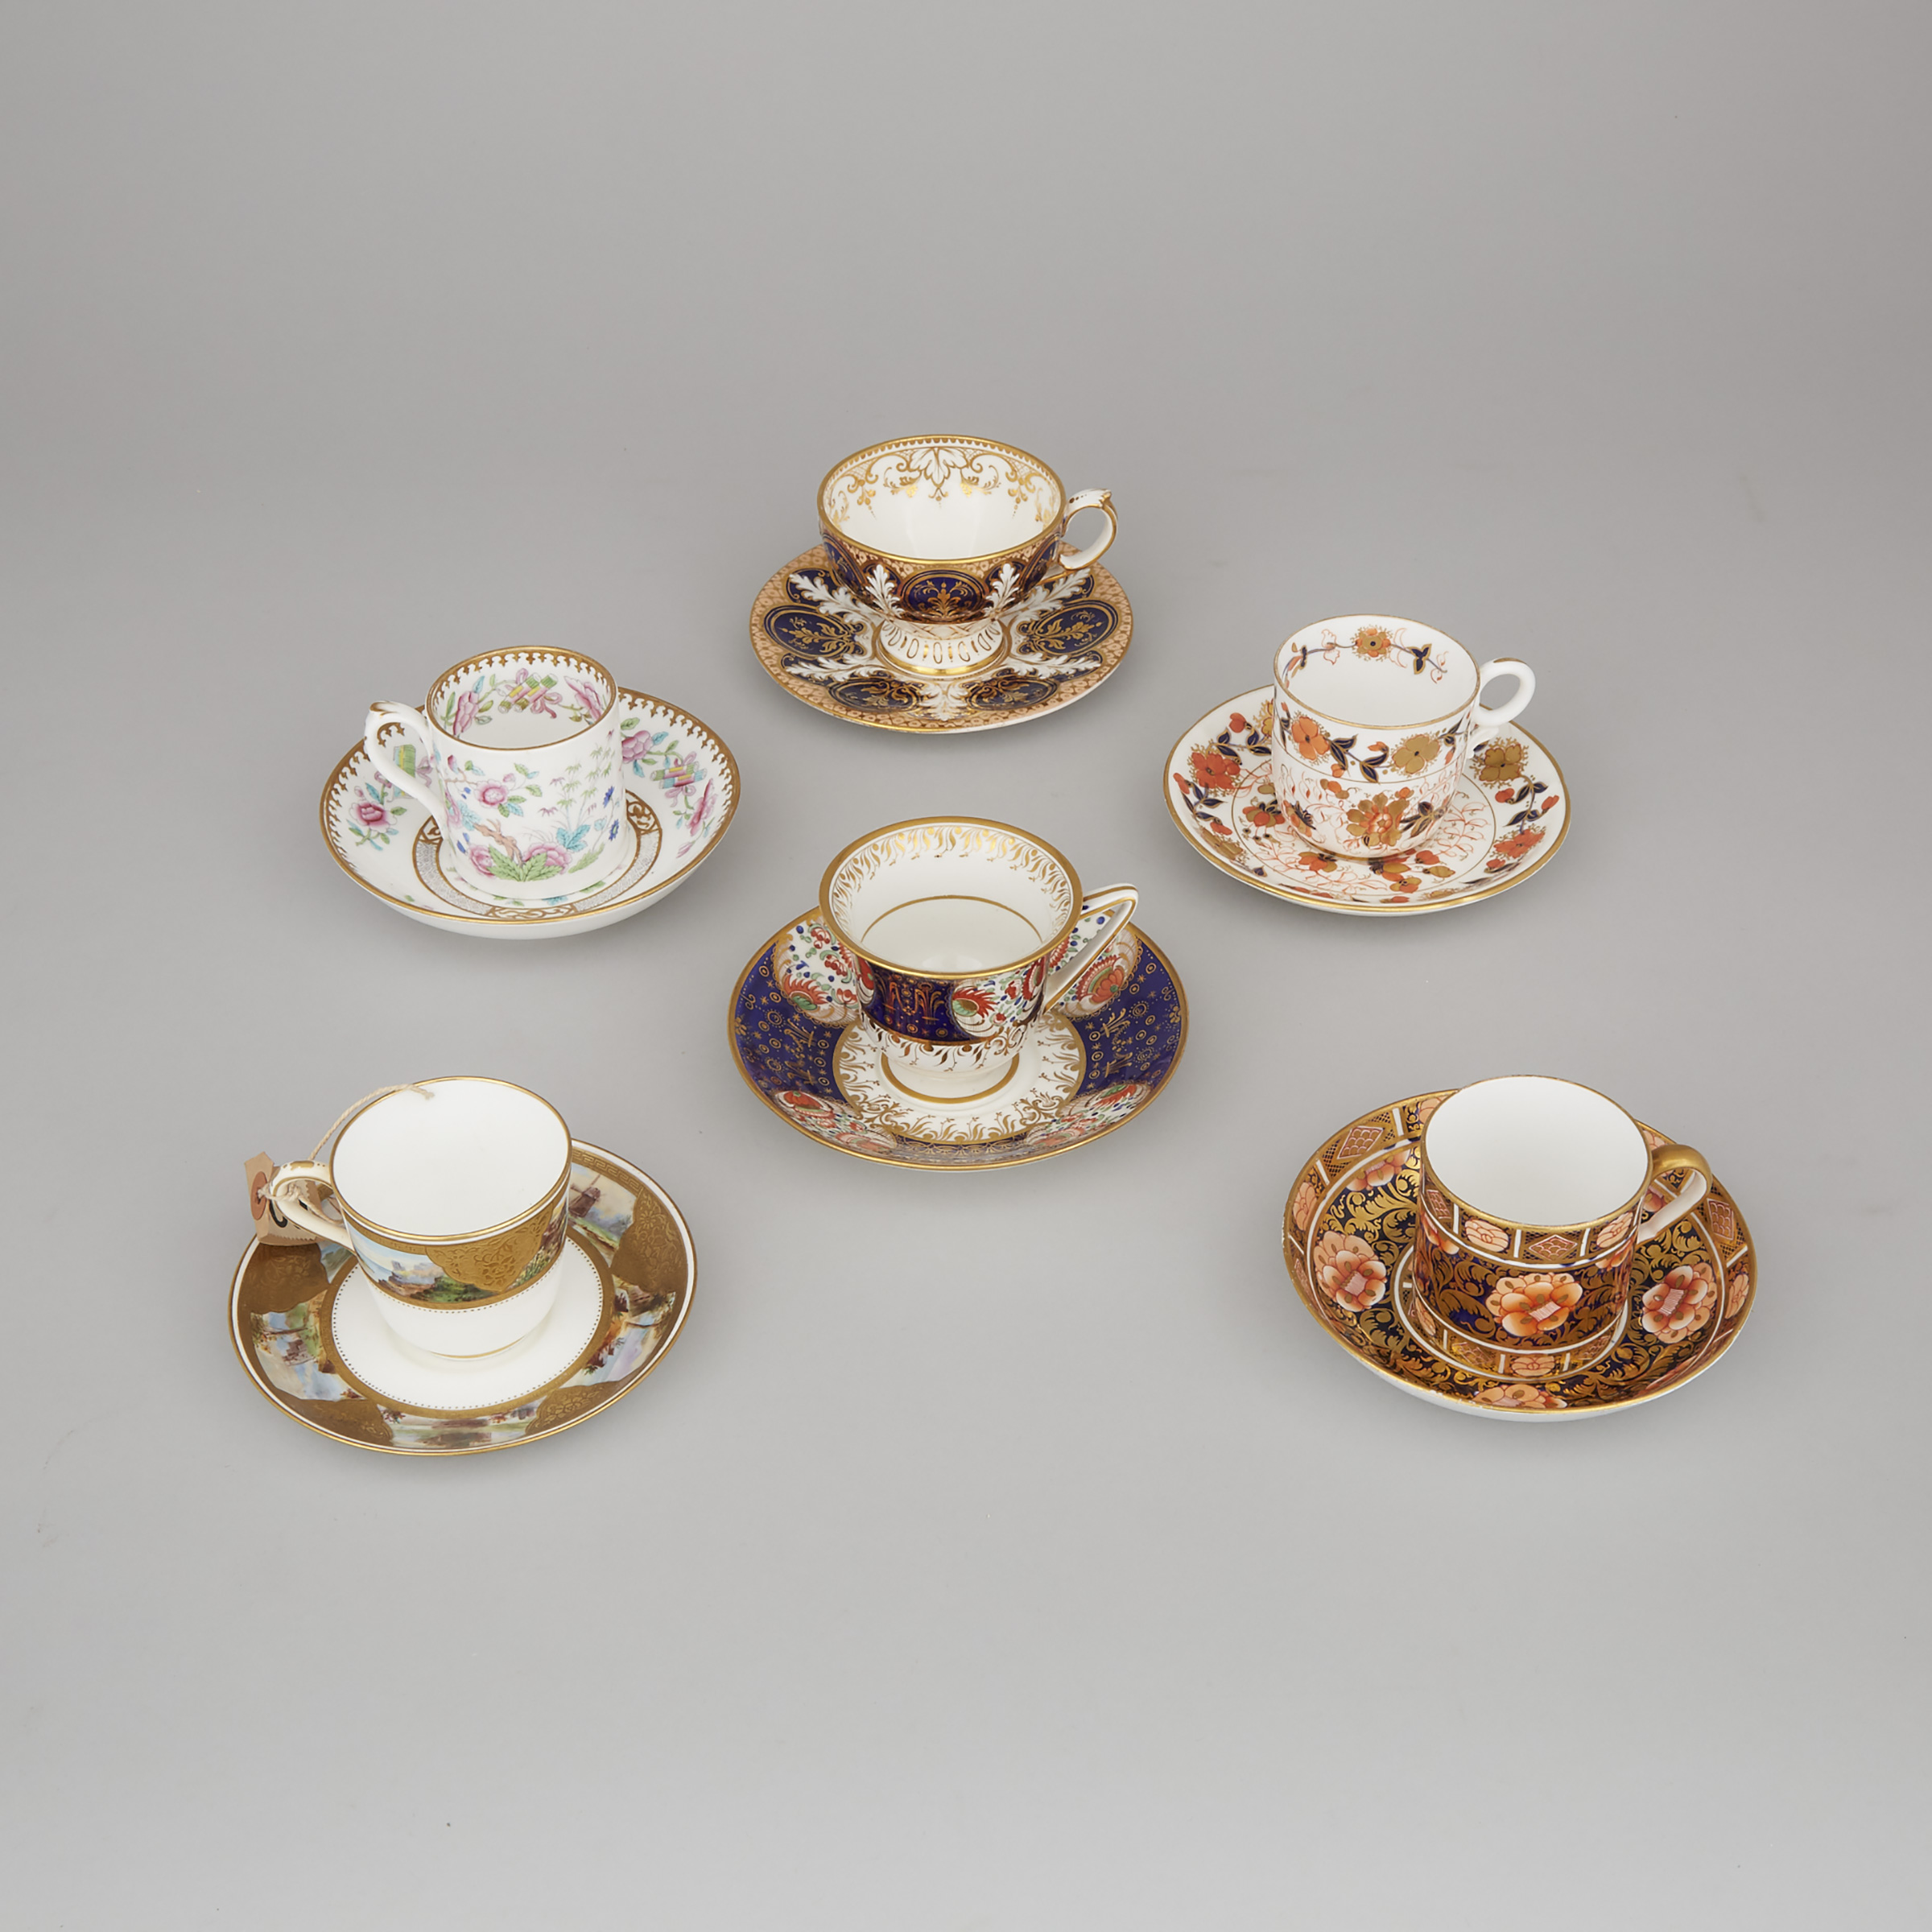 Six Various Minton, Davenport and Other English Porcelain Tea Cups and Saucers, 19th/20th century